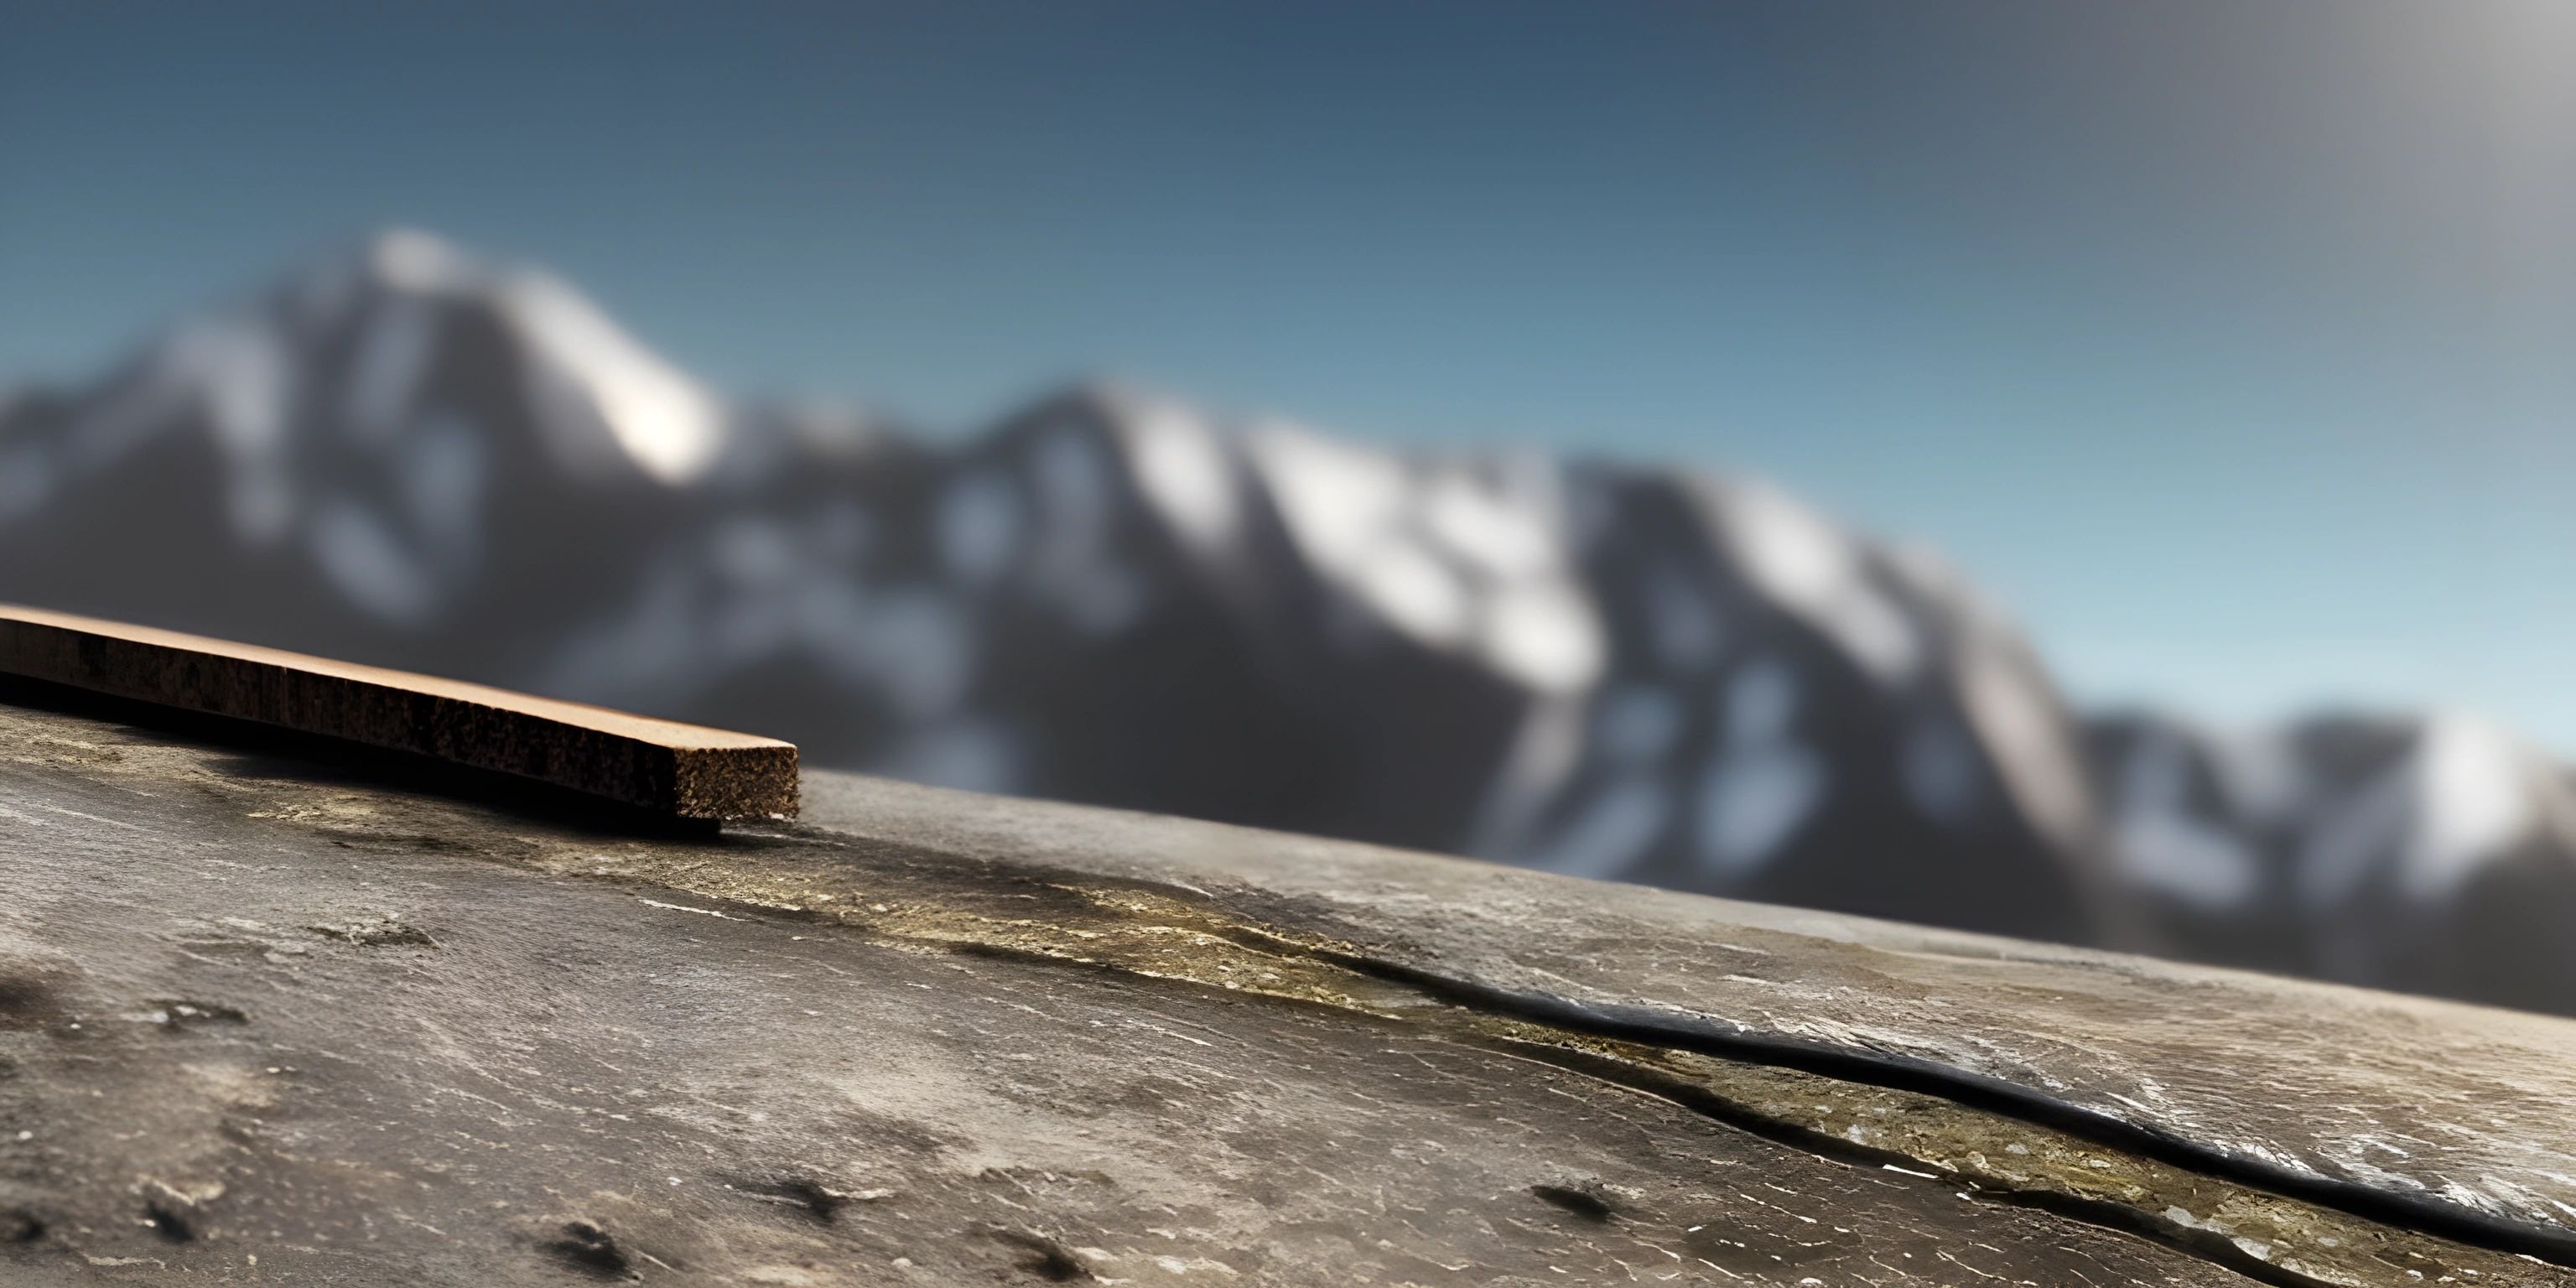 a snowboard laying on top of a cement slab with mountains in the background on a cloudy day